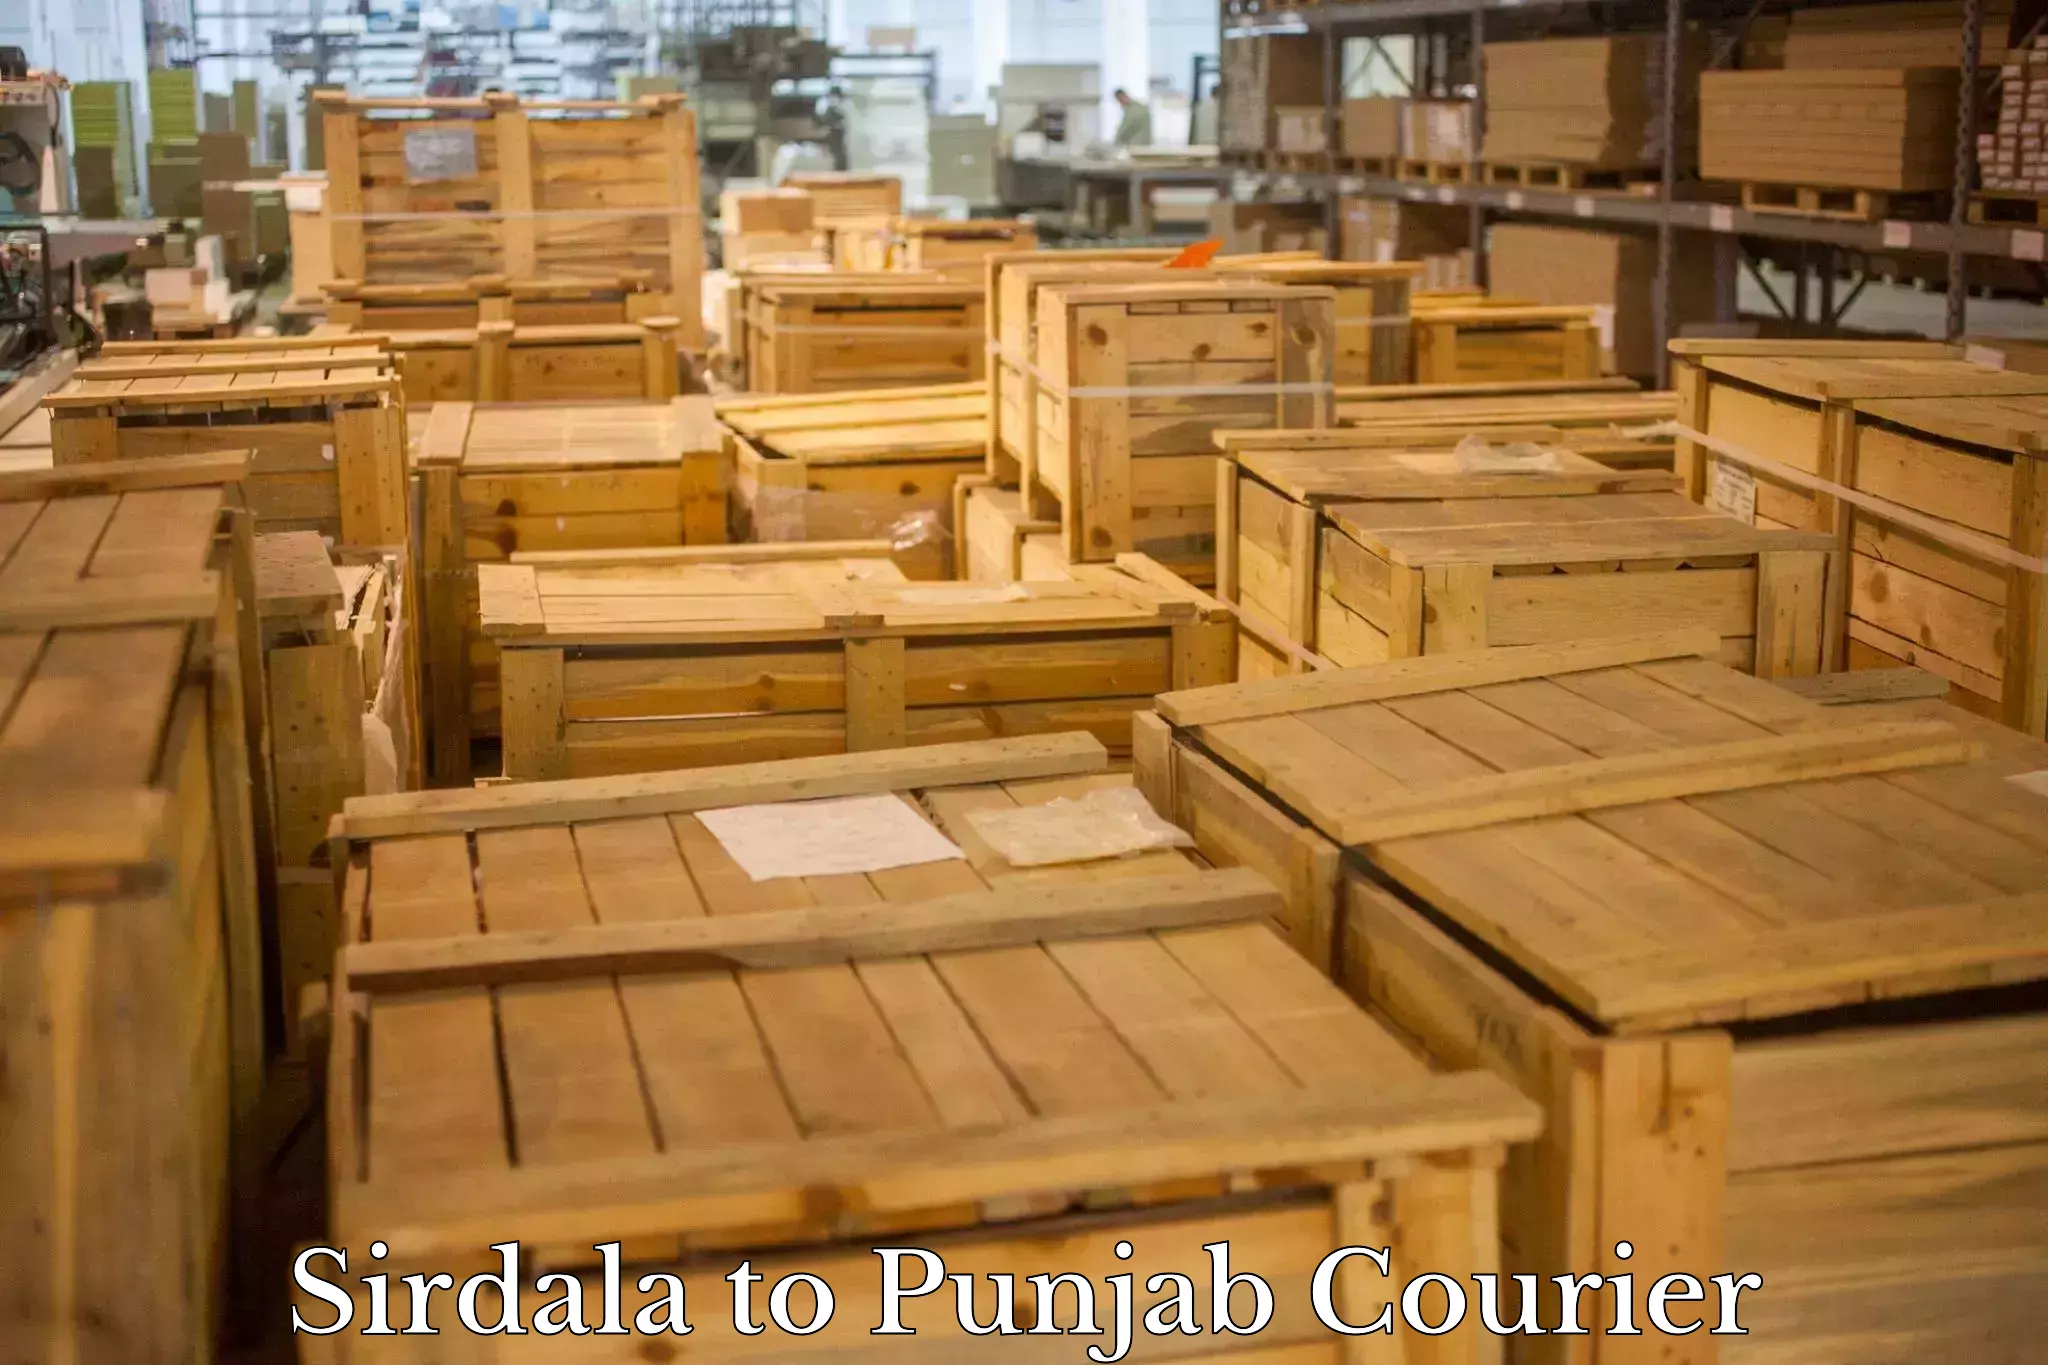 Parcel delivery in Sirdala to Punjab